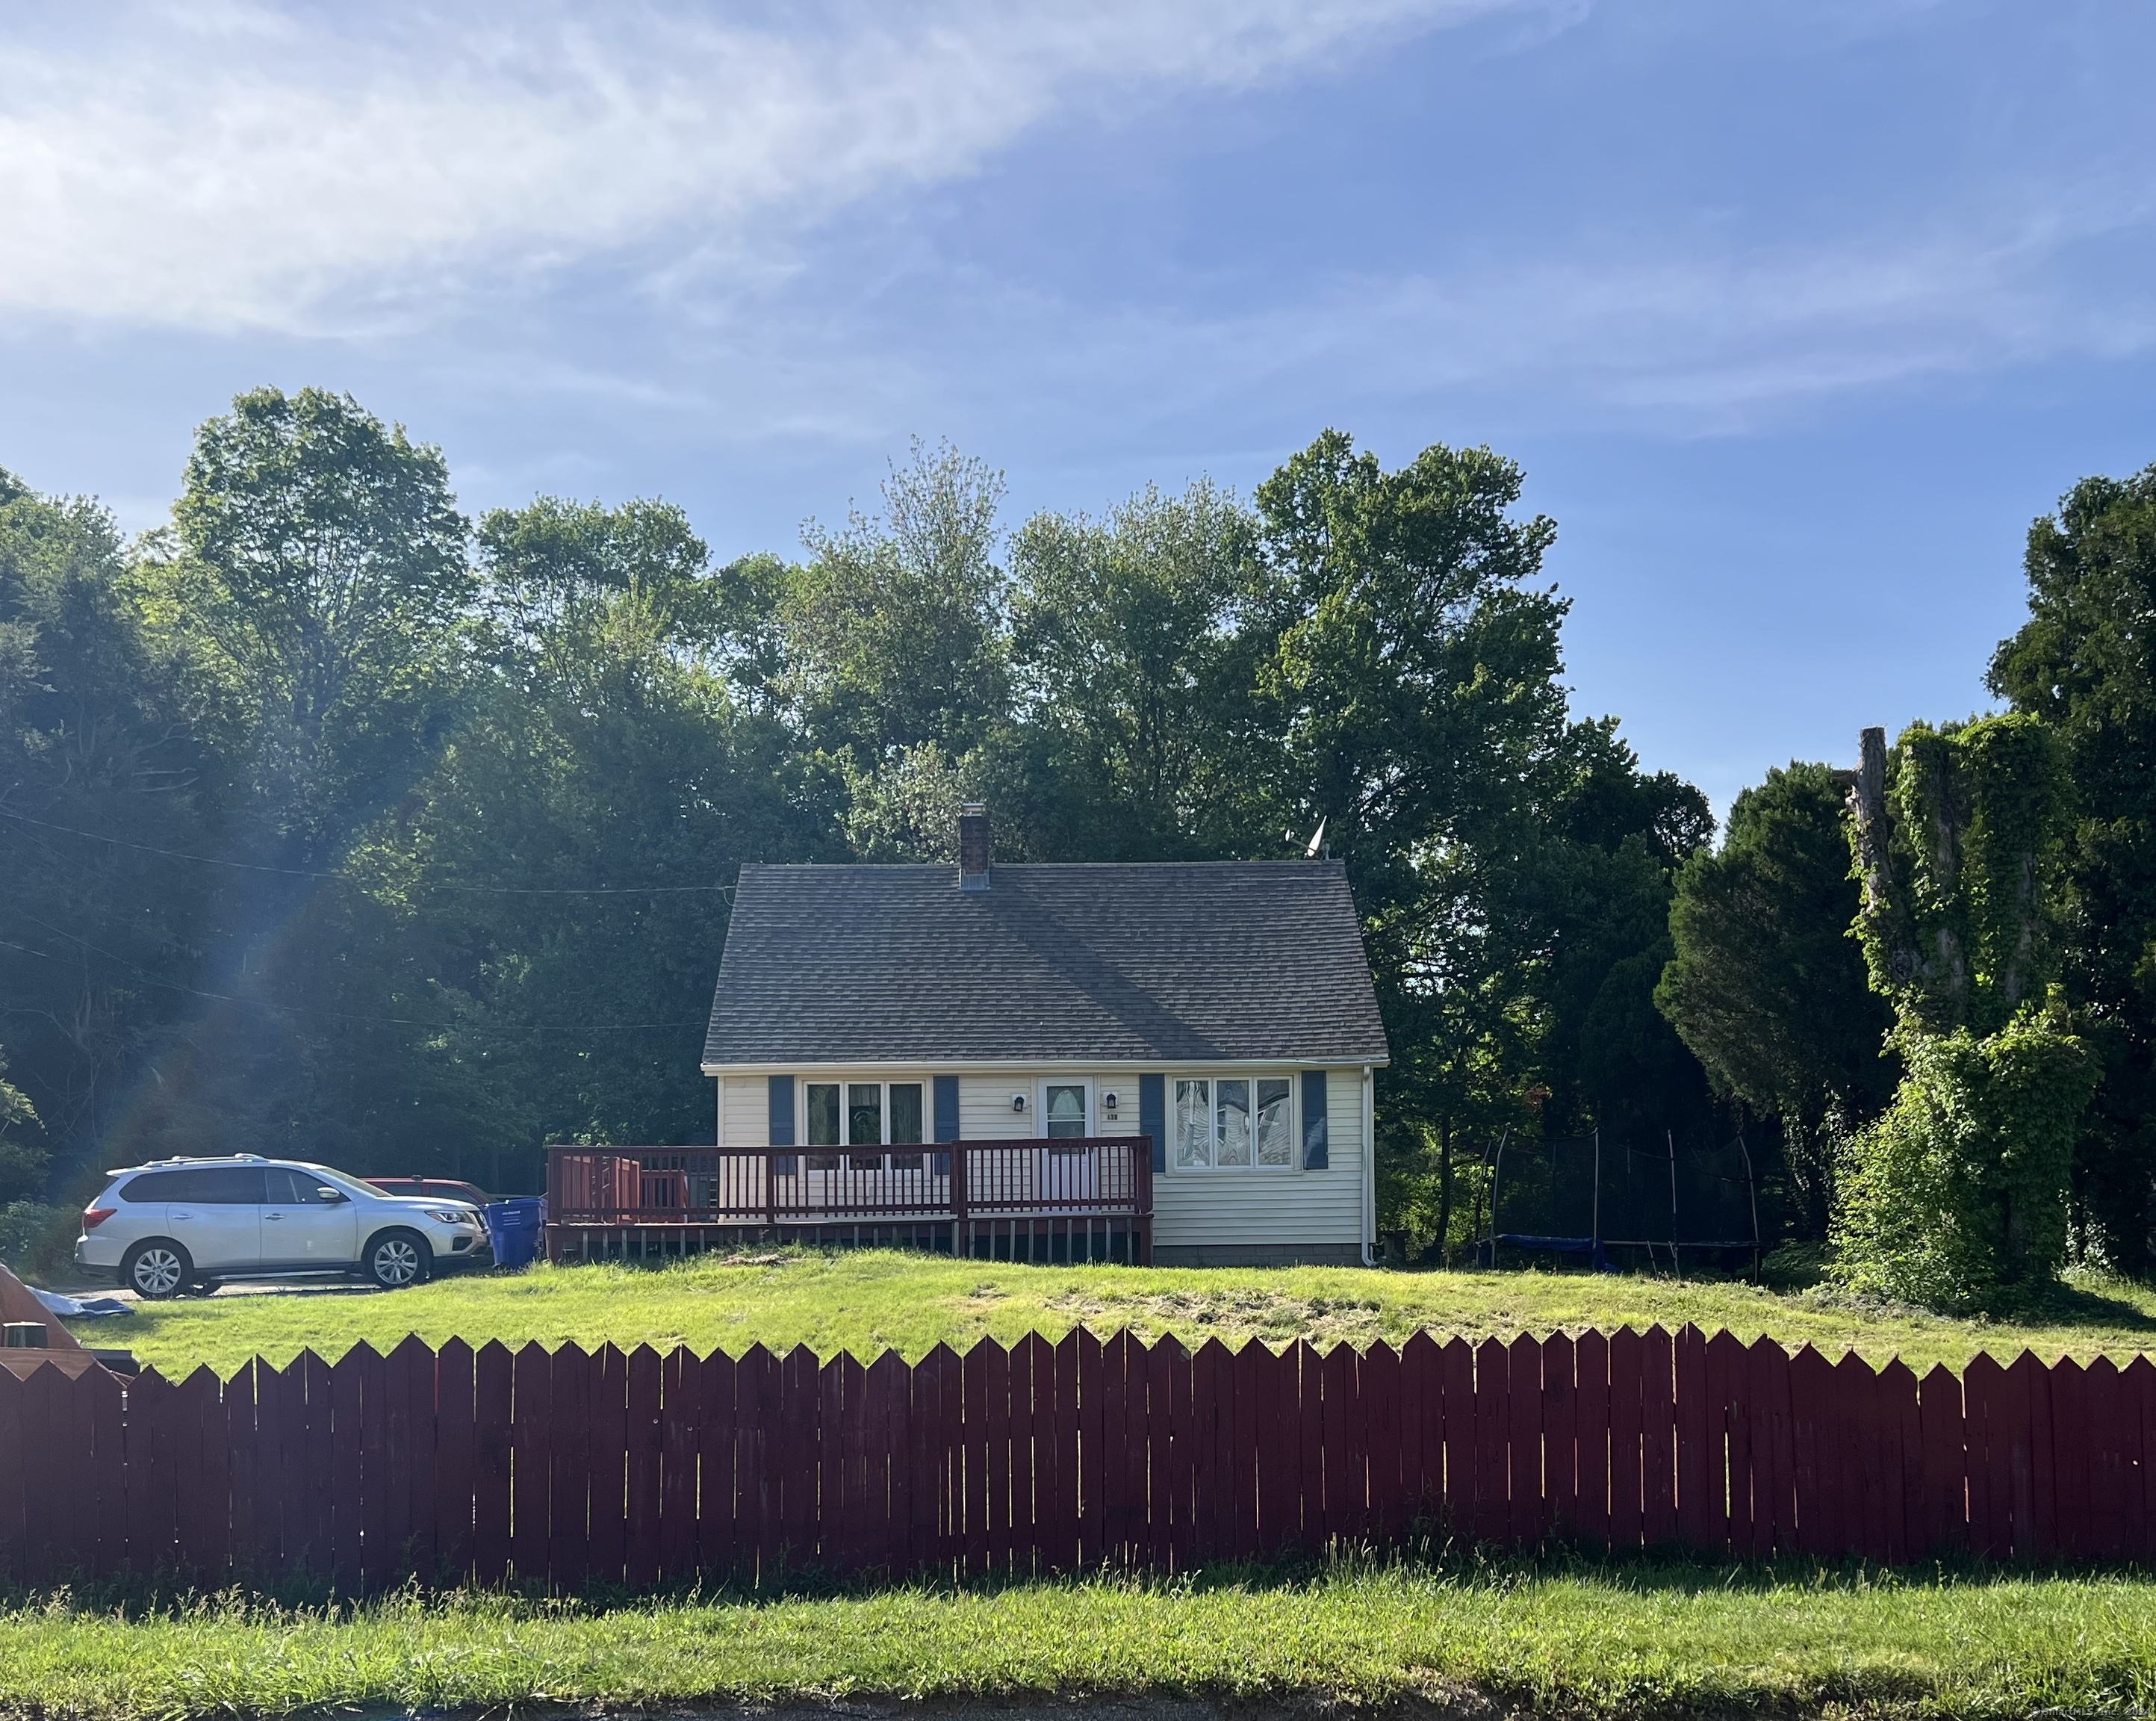 Property for Sale at 138 W Bridge Street, Deep River, Connecticut - Bedrooms: 3 
Bathrooms: 2 
Rooms: 6  - $285,000